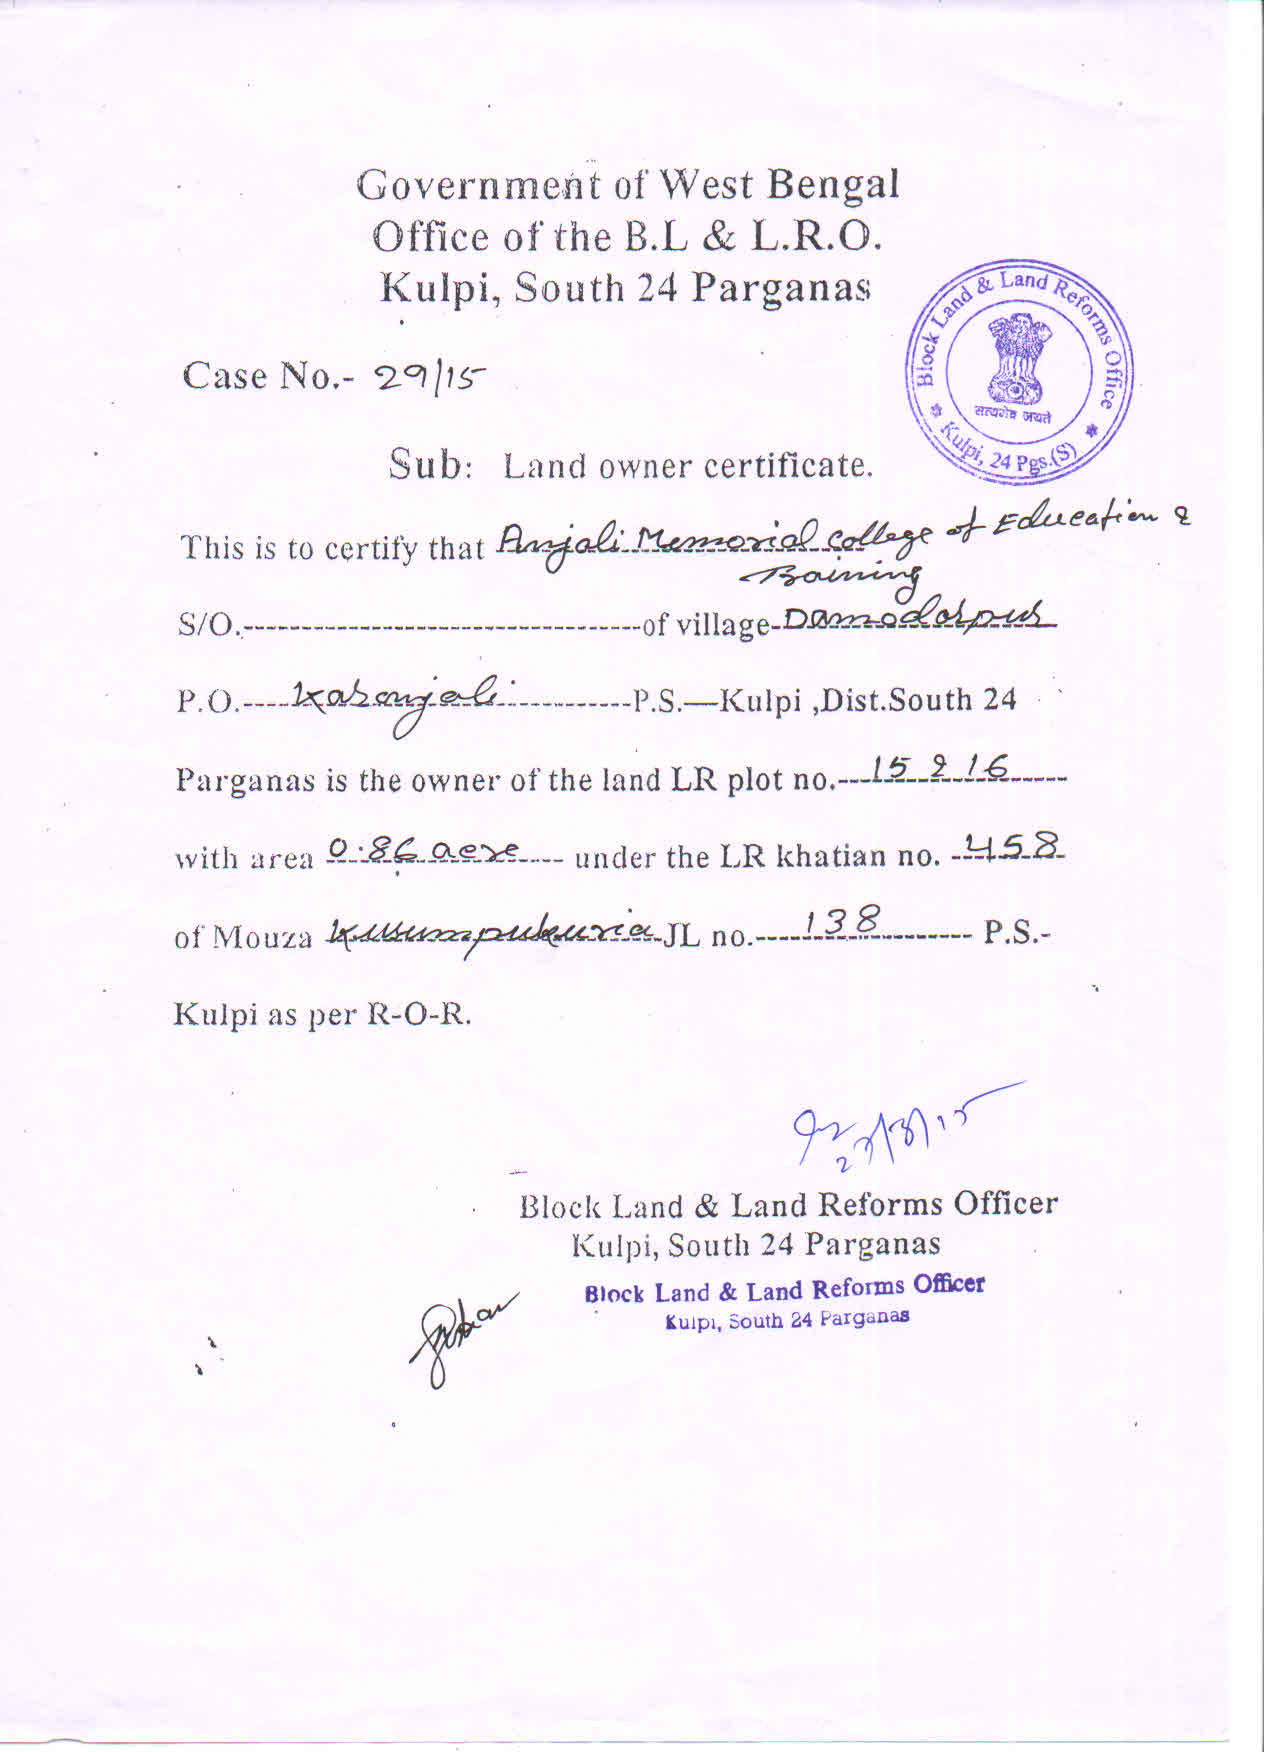 ownership certificate